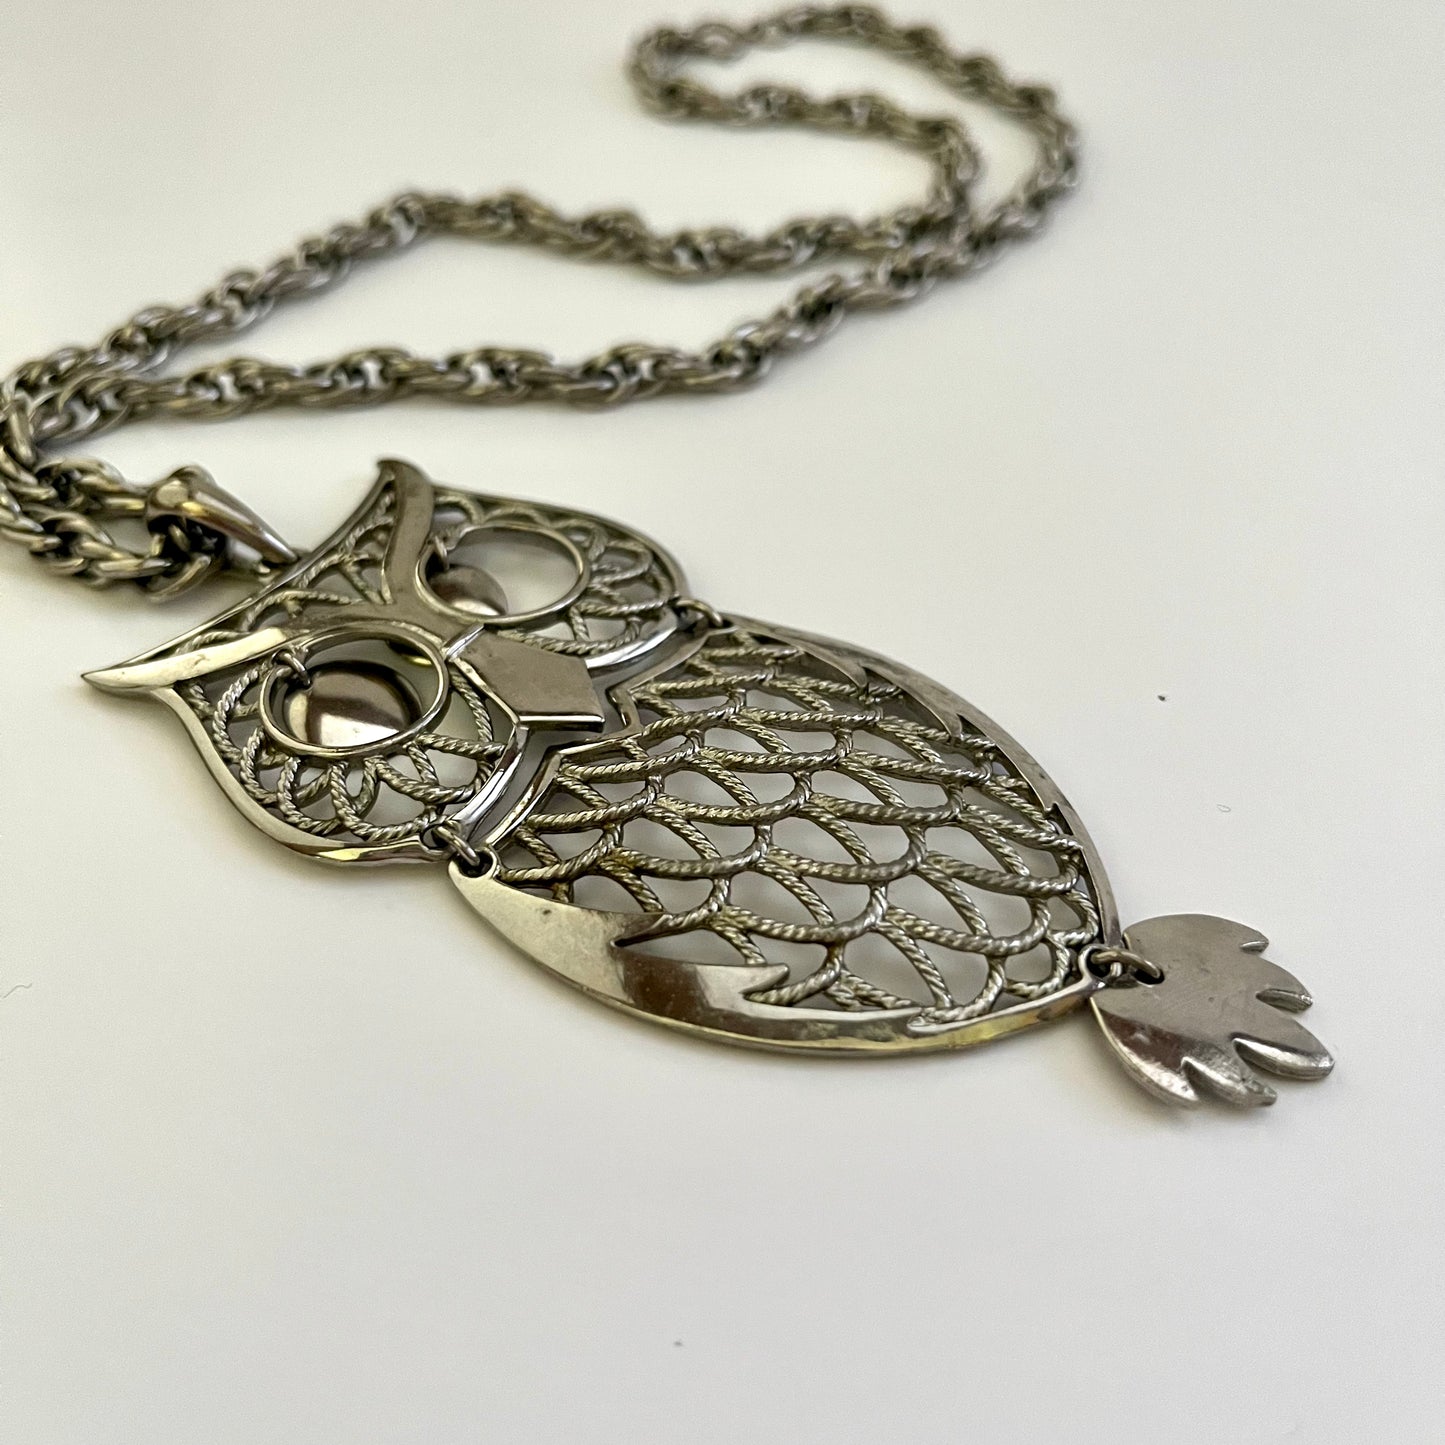 1970s Articulated Owl Pendant Necklace